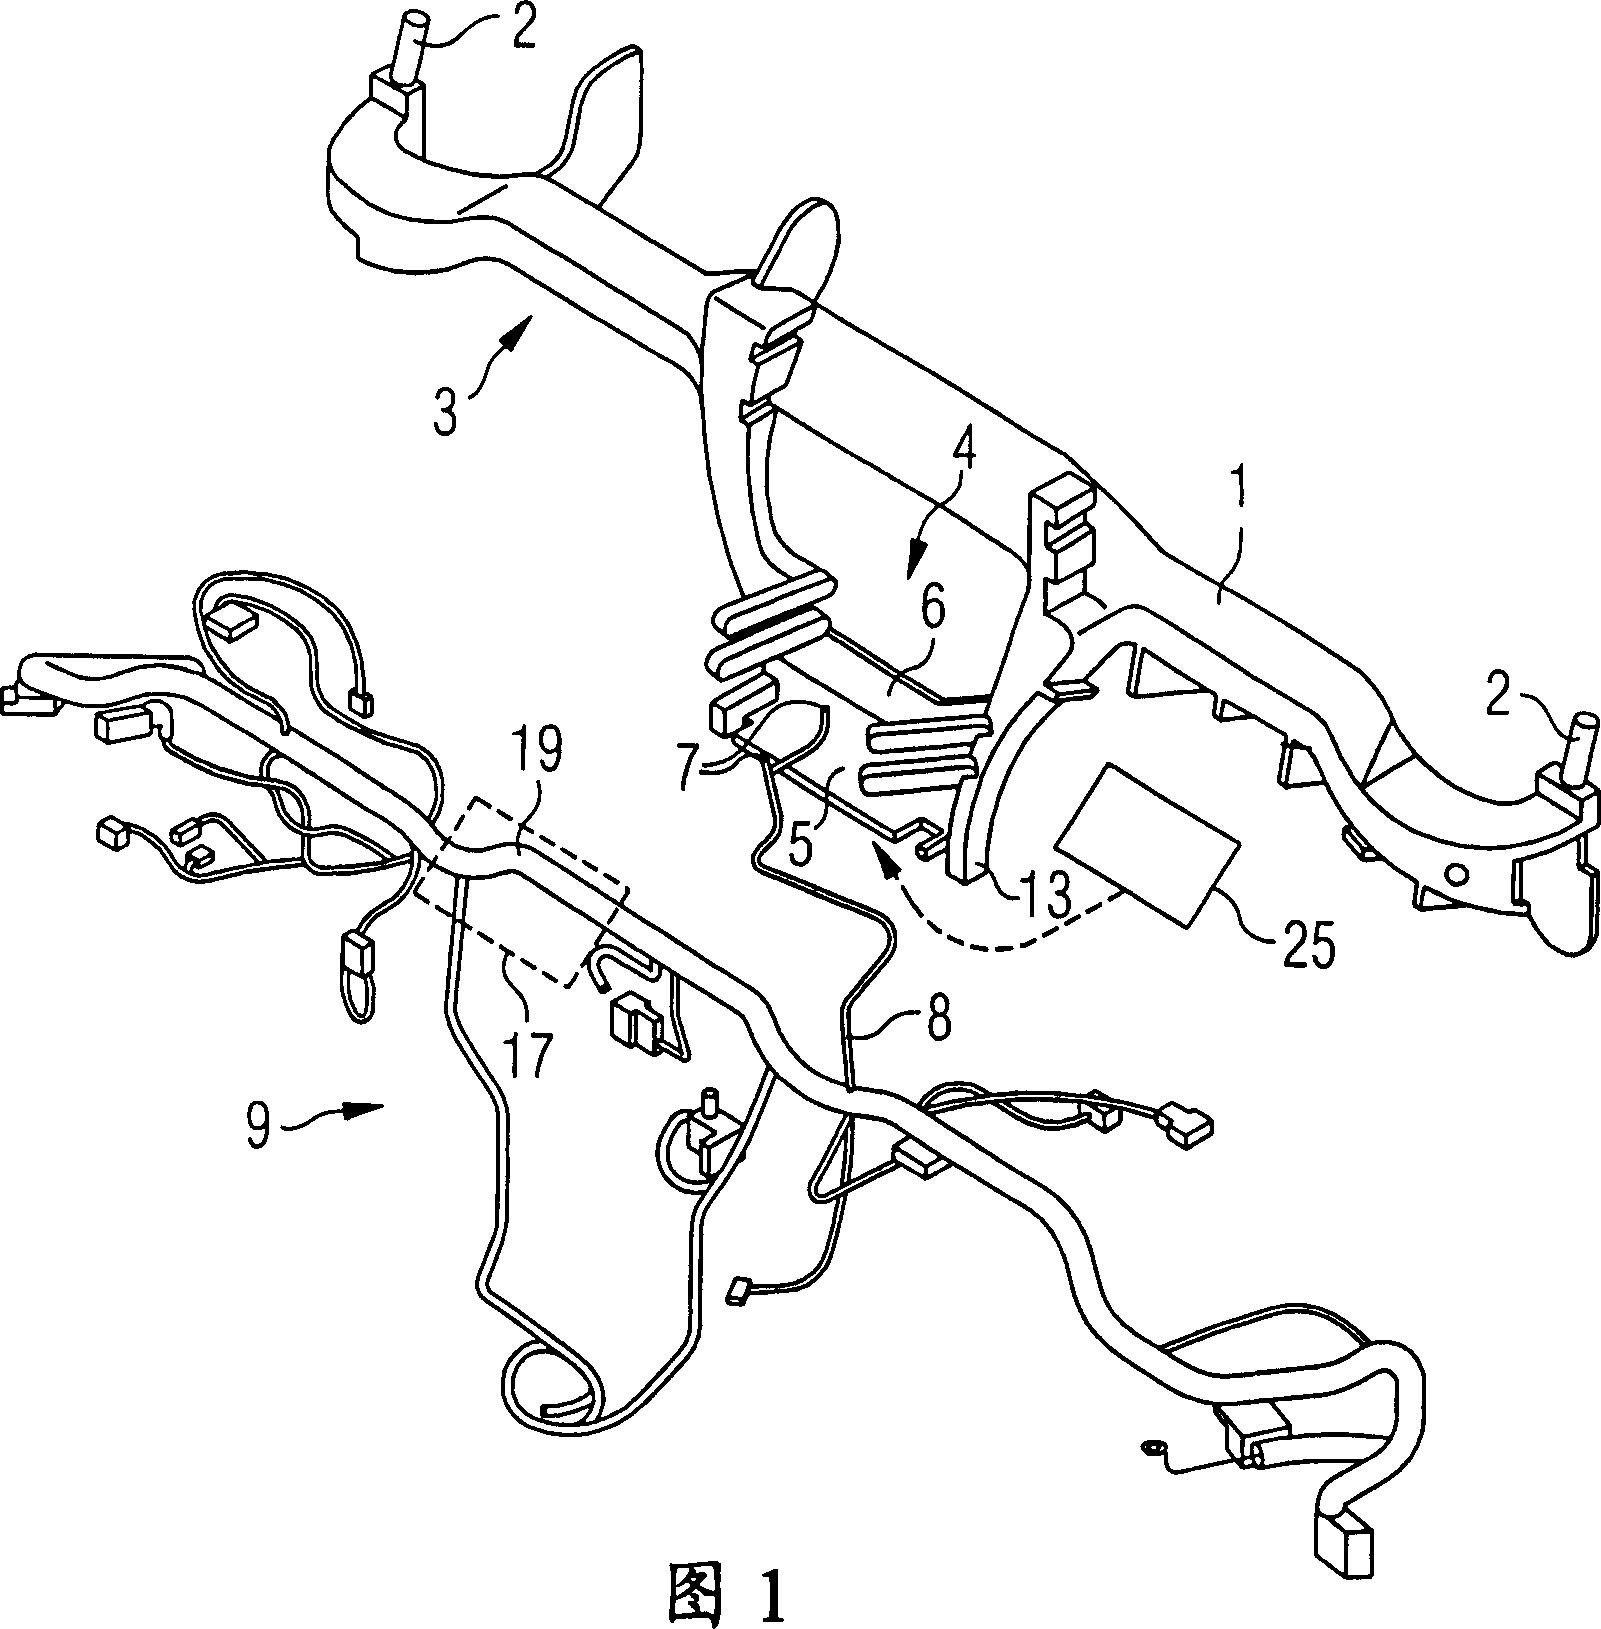 Arrangement for electrically connecting a magnesium support structure to the ground potential of a motor vehicle